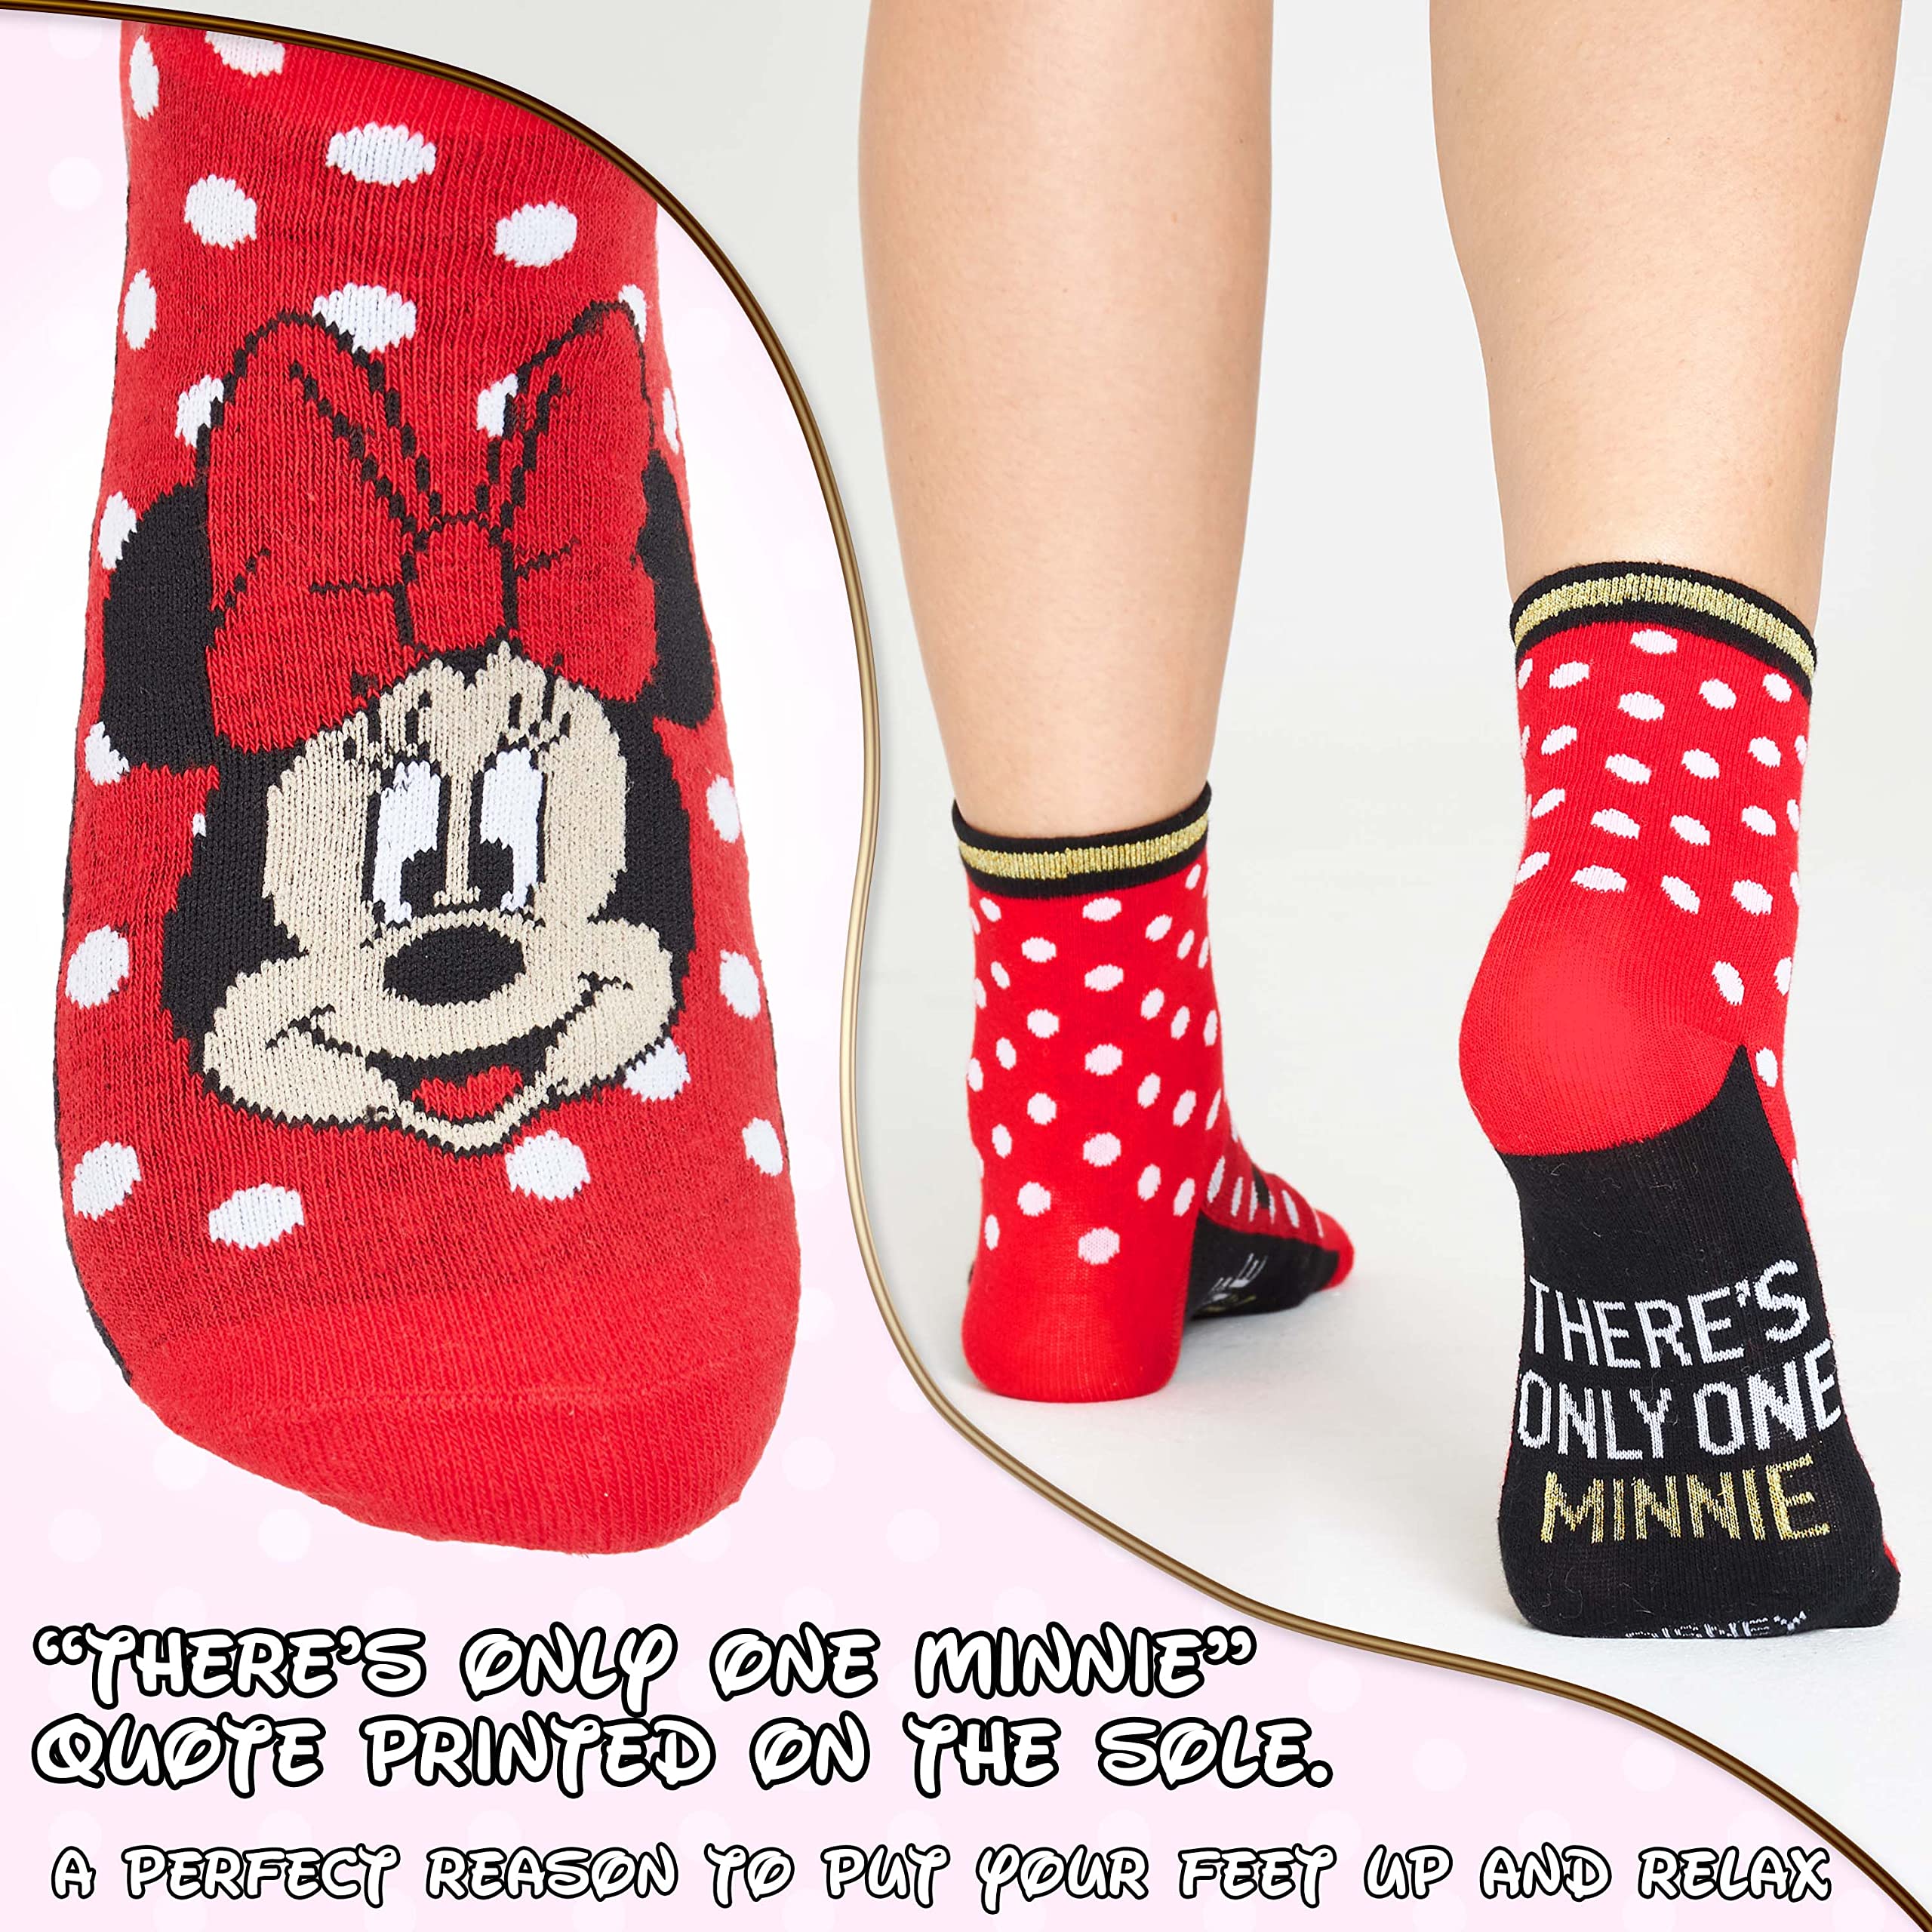 Disney Womens Calf Socks, Soft Stretchy Socks in Pack of 5 - Gifts for Women (Red/Black)